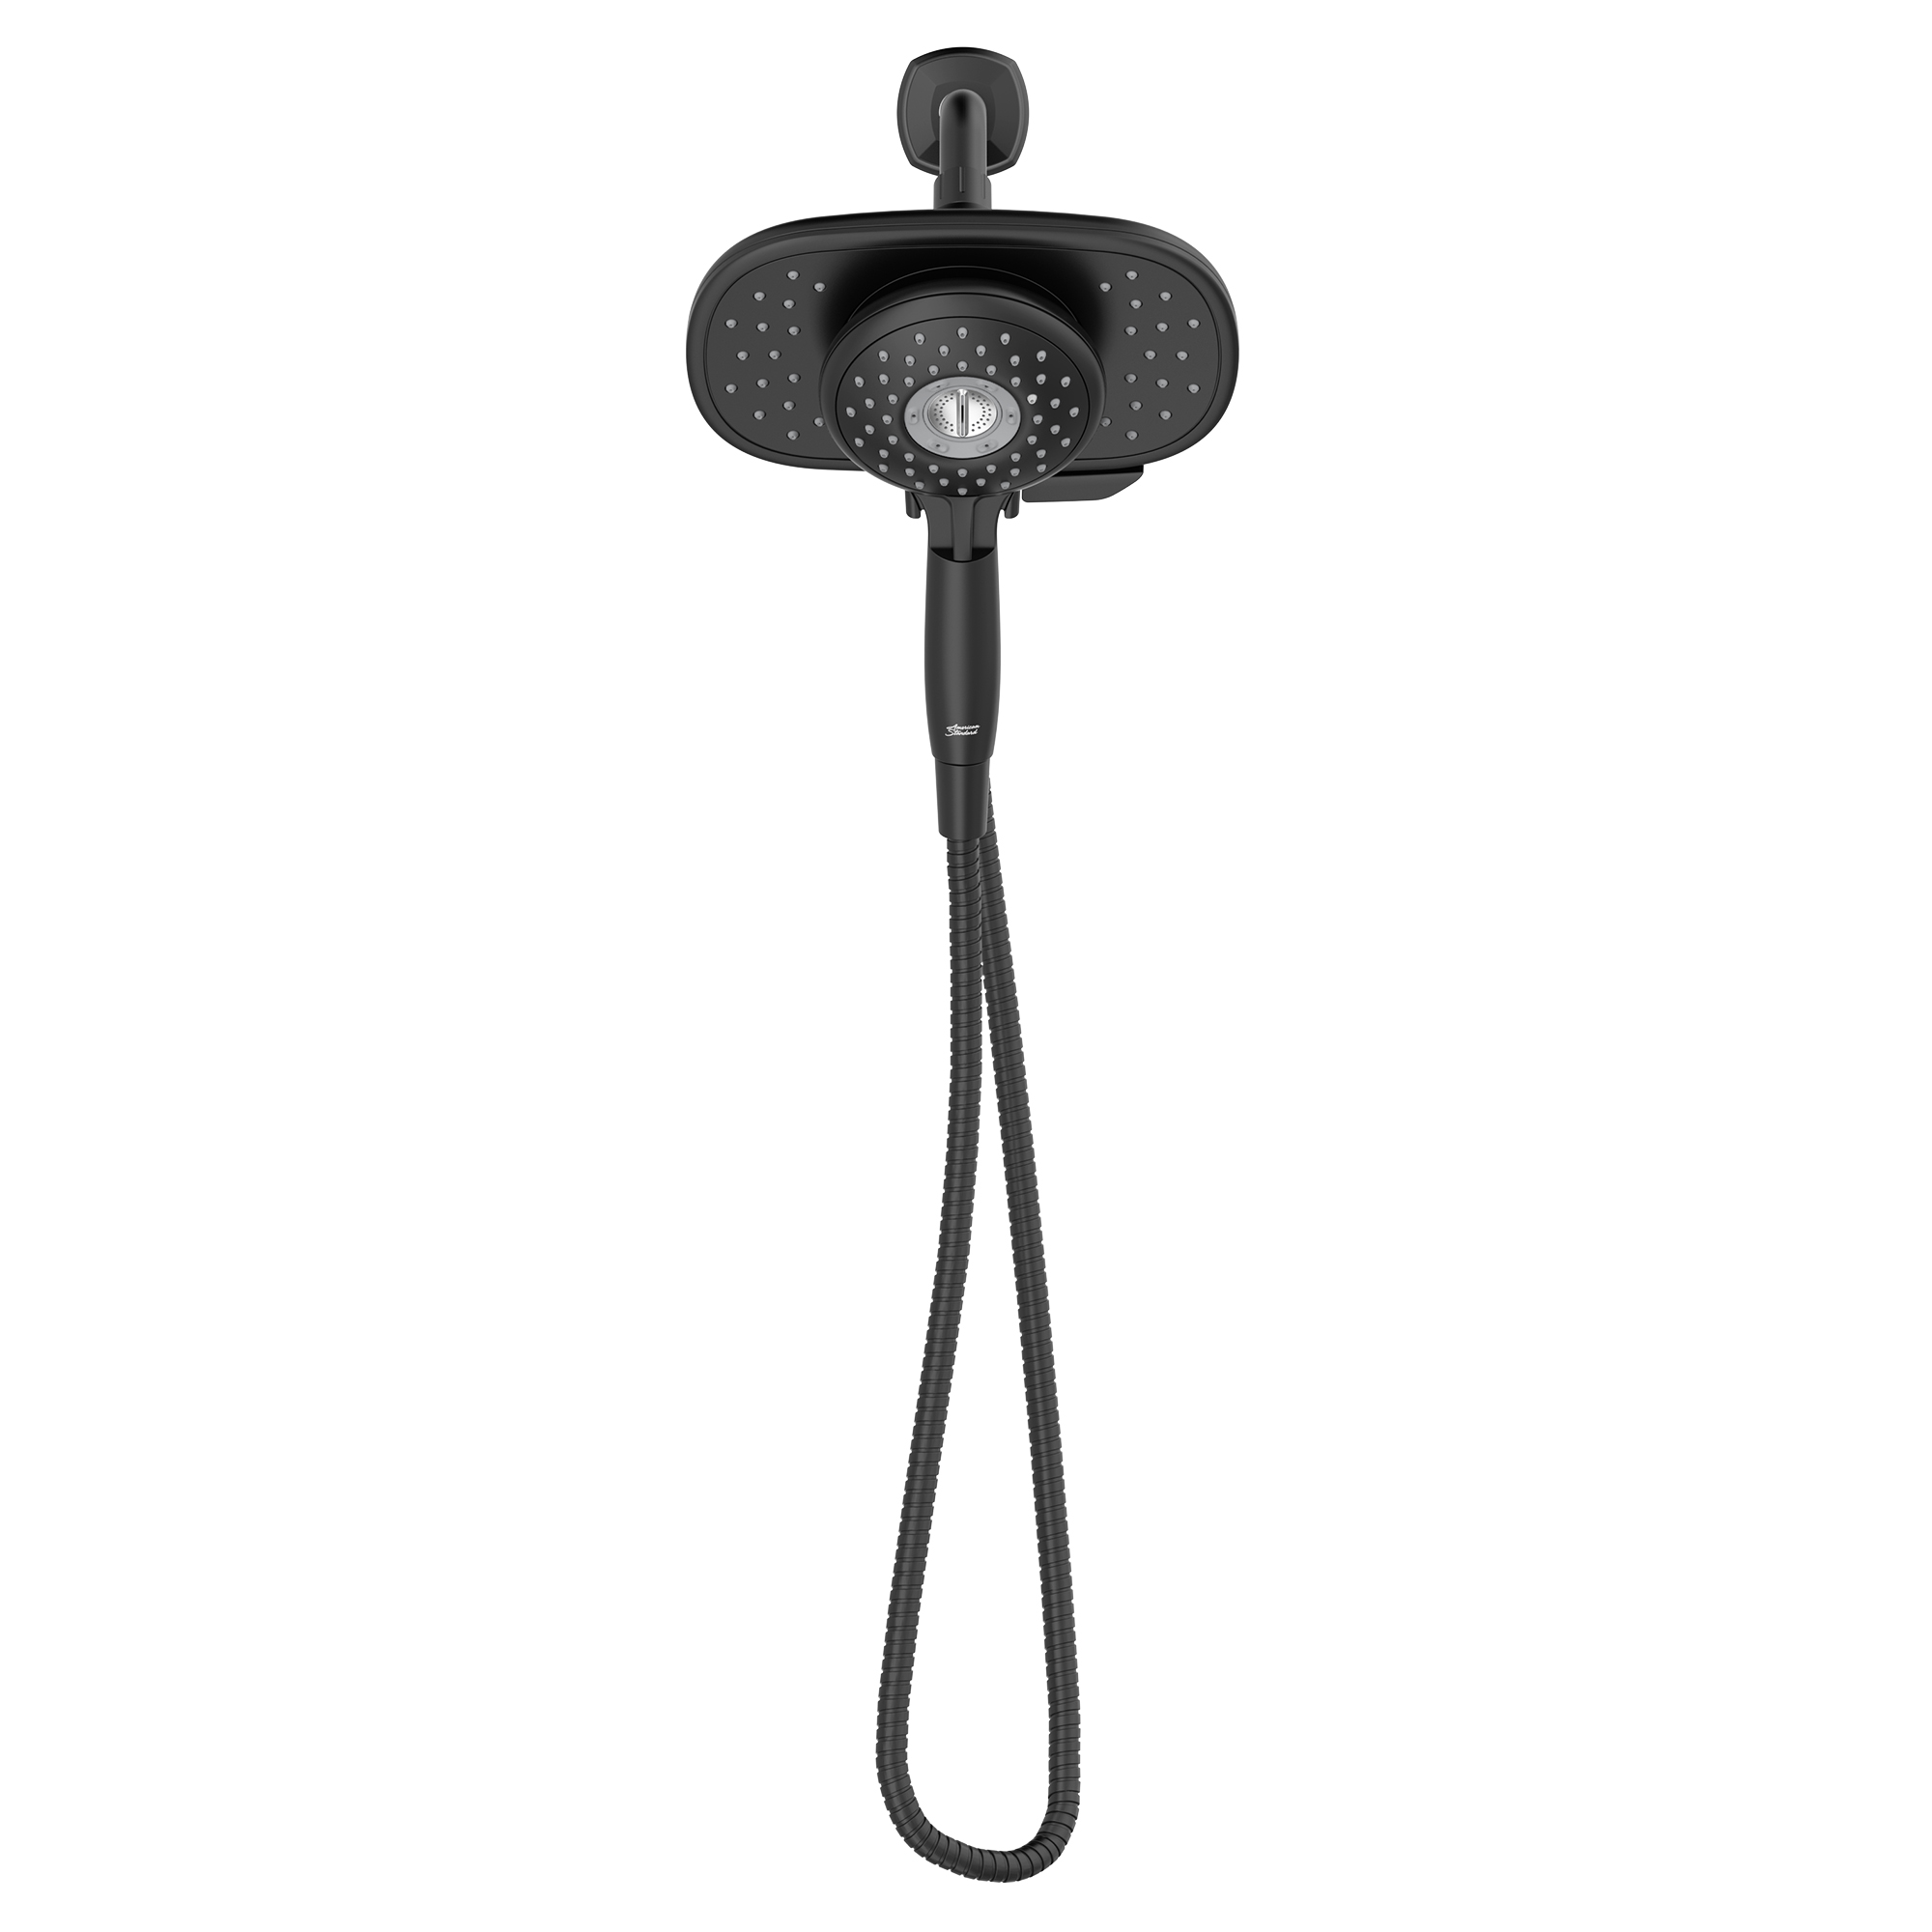 Spectra® Duo 2-in-1 Hand Shower 1.8 gpm/6.8 L/min